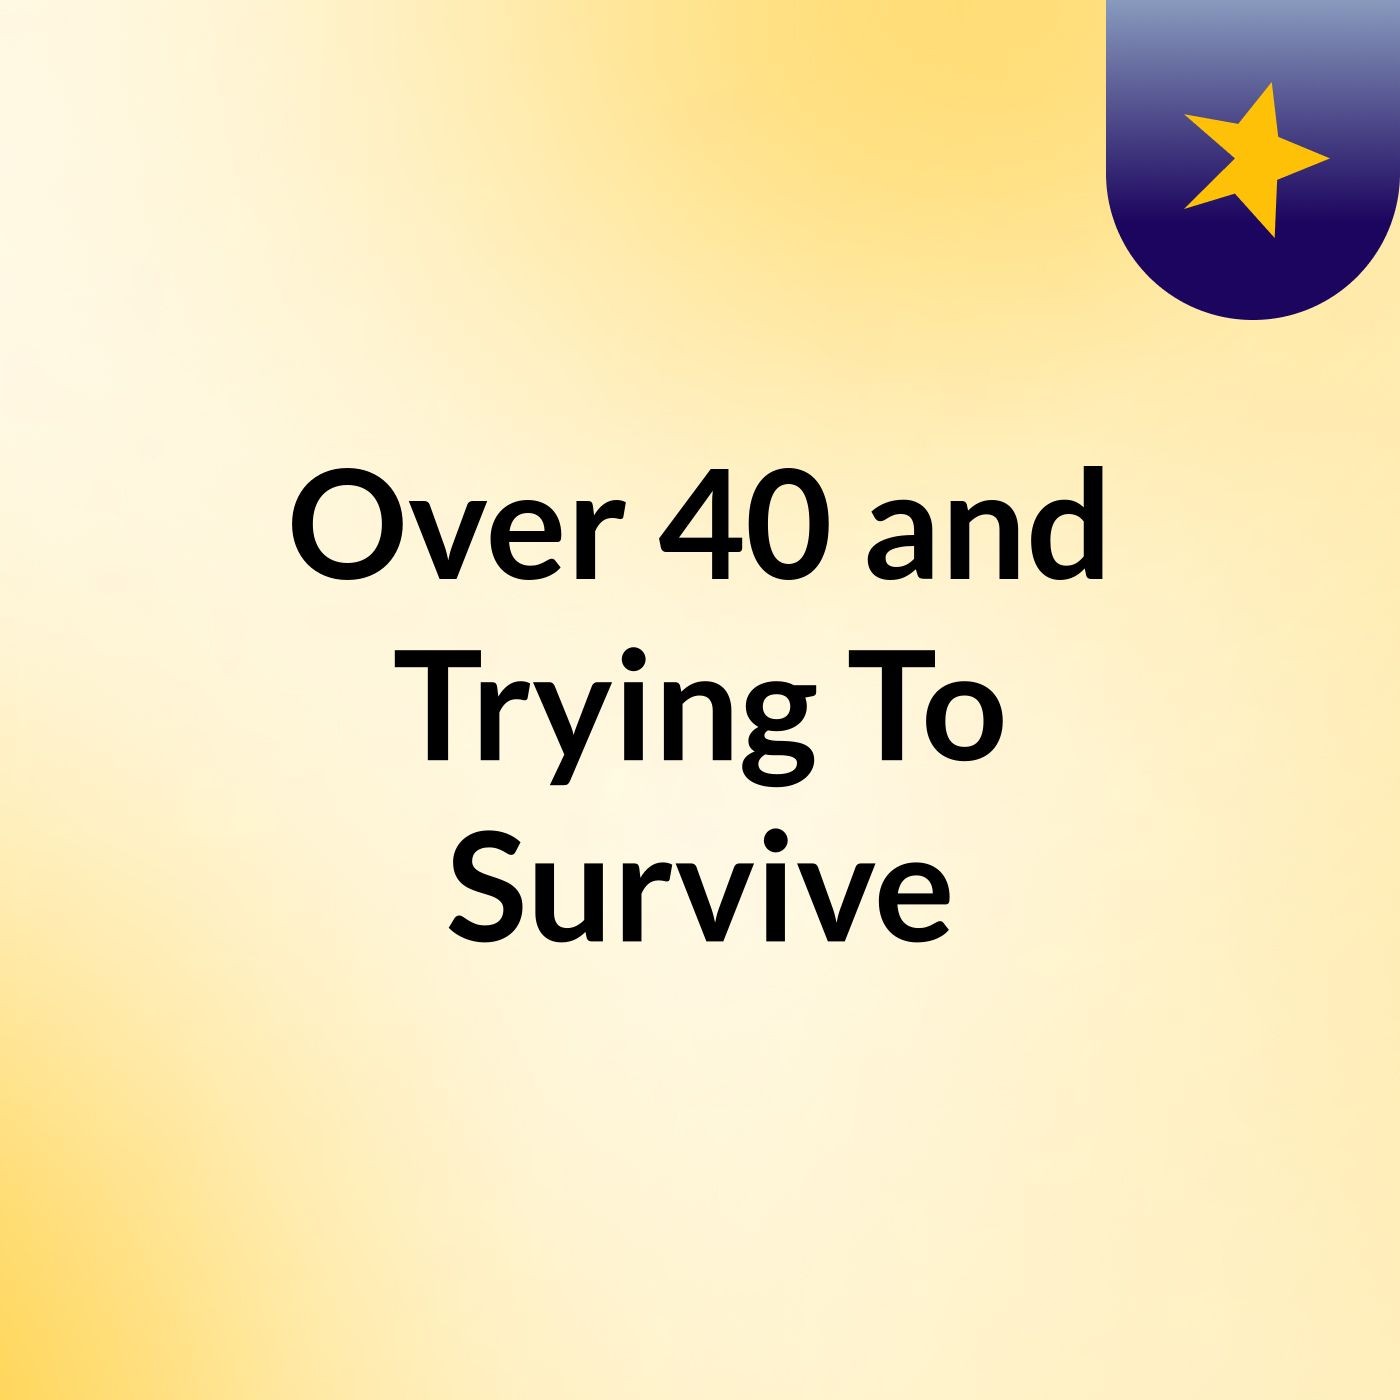 Over 40 and Trying To Survive